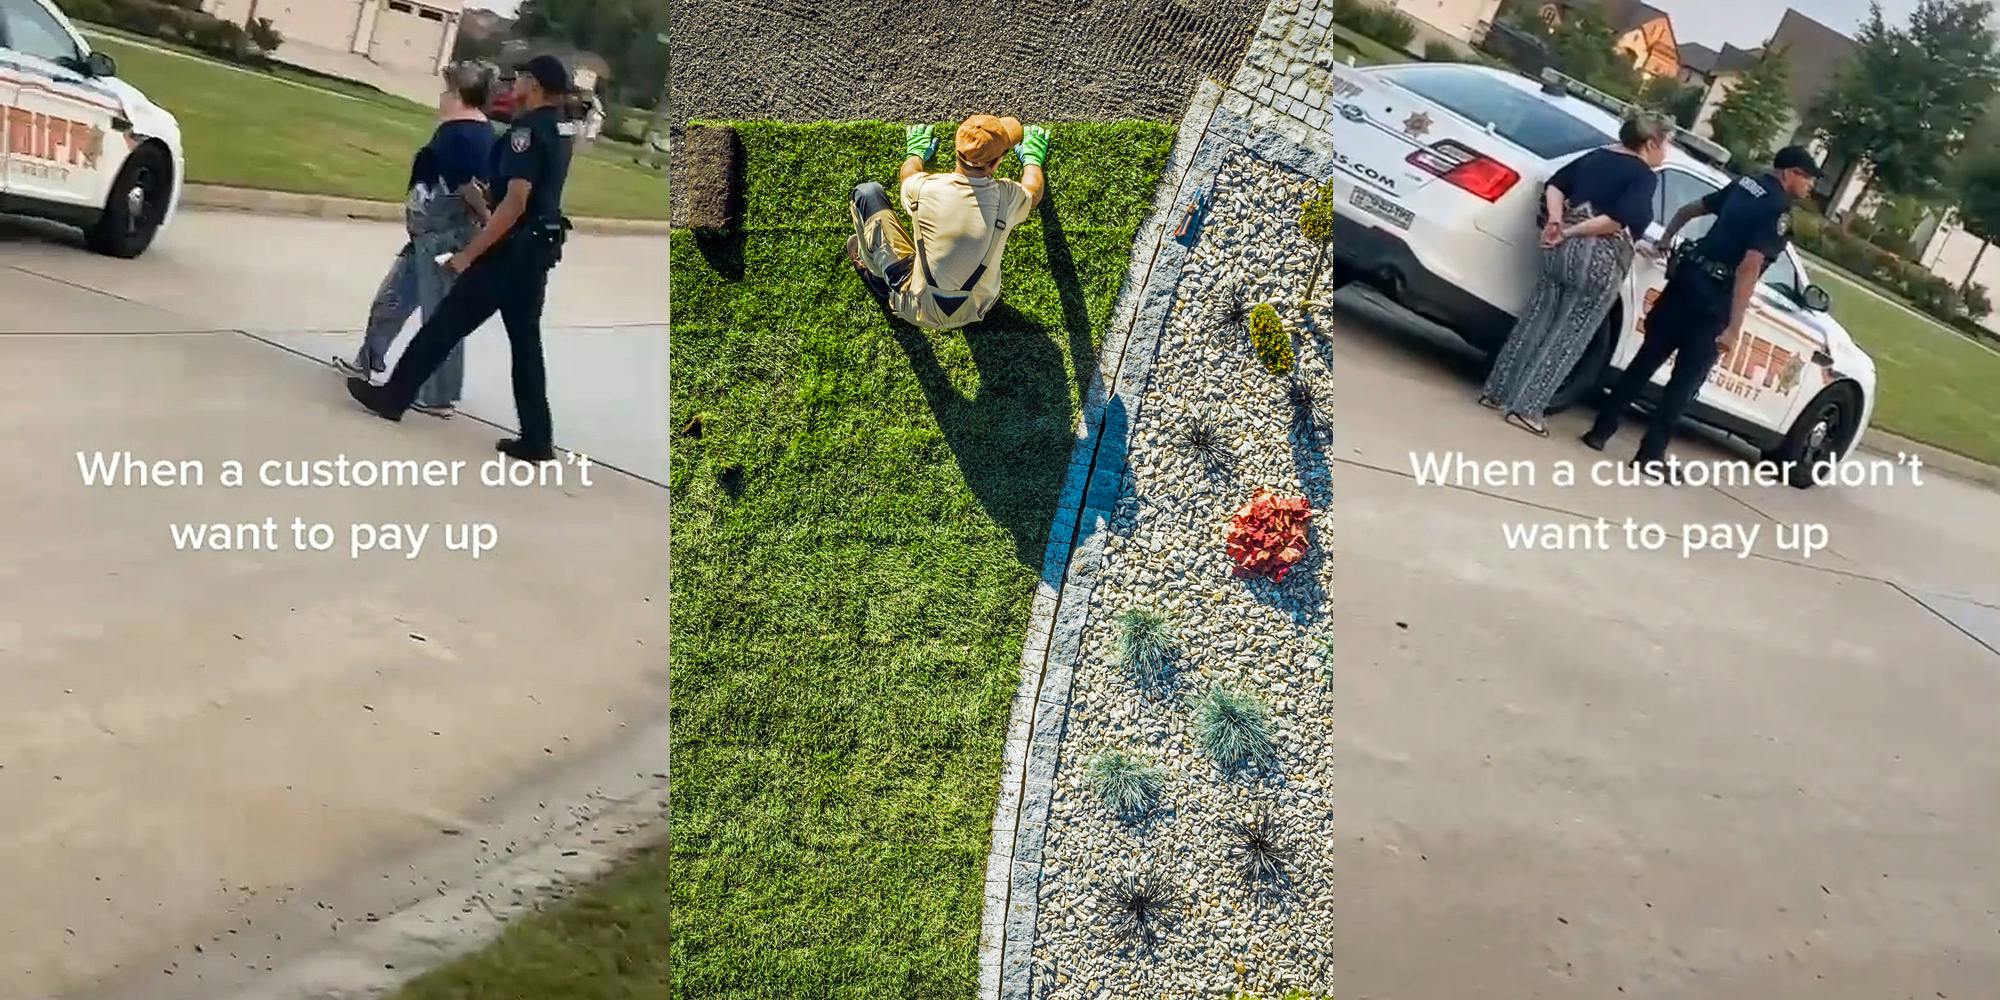 woman in handcuffs police officer walking her across the street caption "When a customer don't want to pay up" (l) landscaper rolling rolls of sod (c) woman in cuffs and police officer at police car caption "When a customer don't want to pay up" (r)